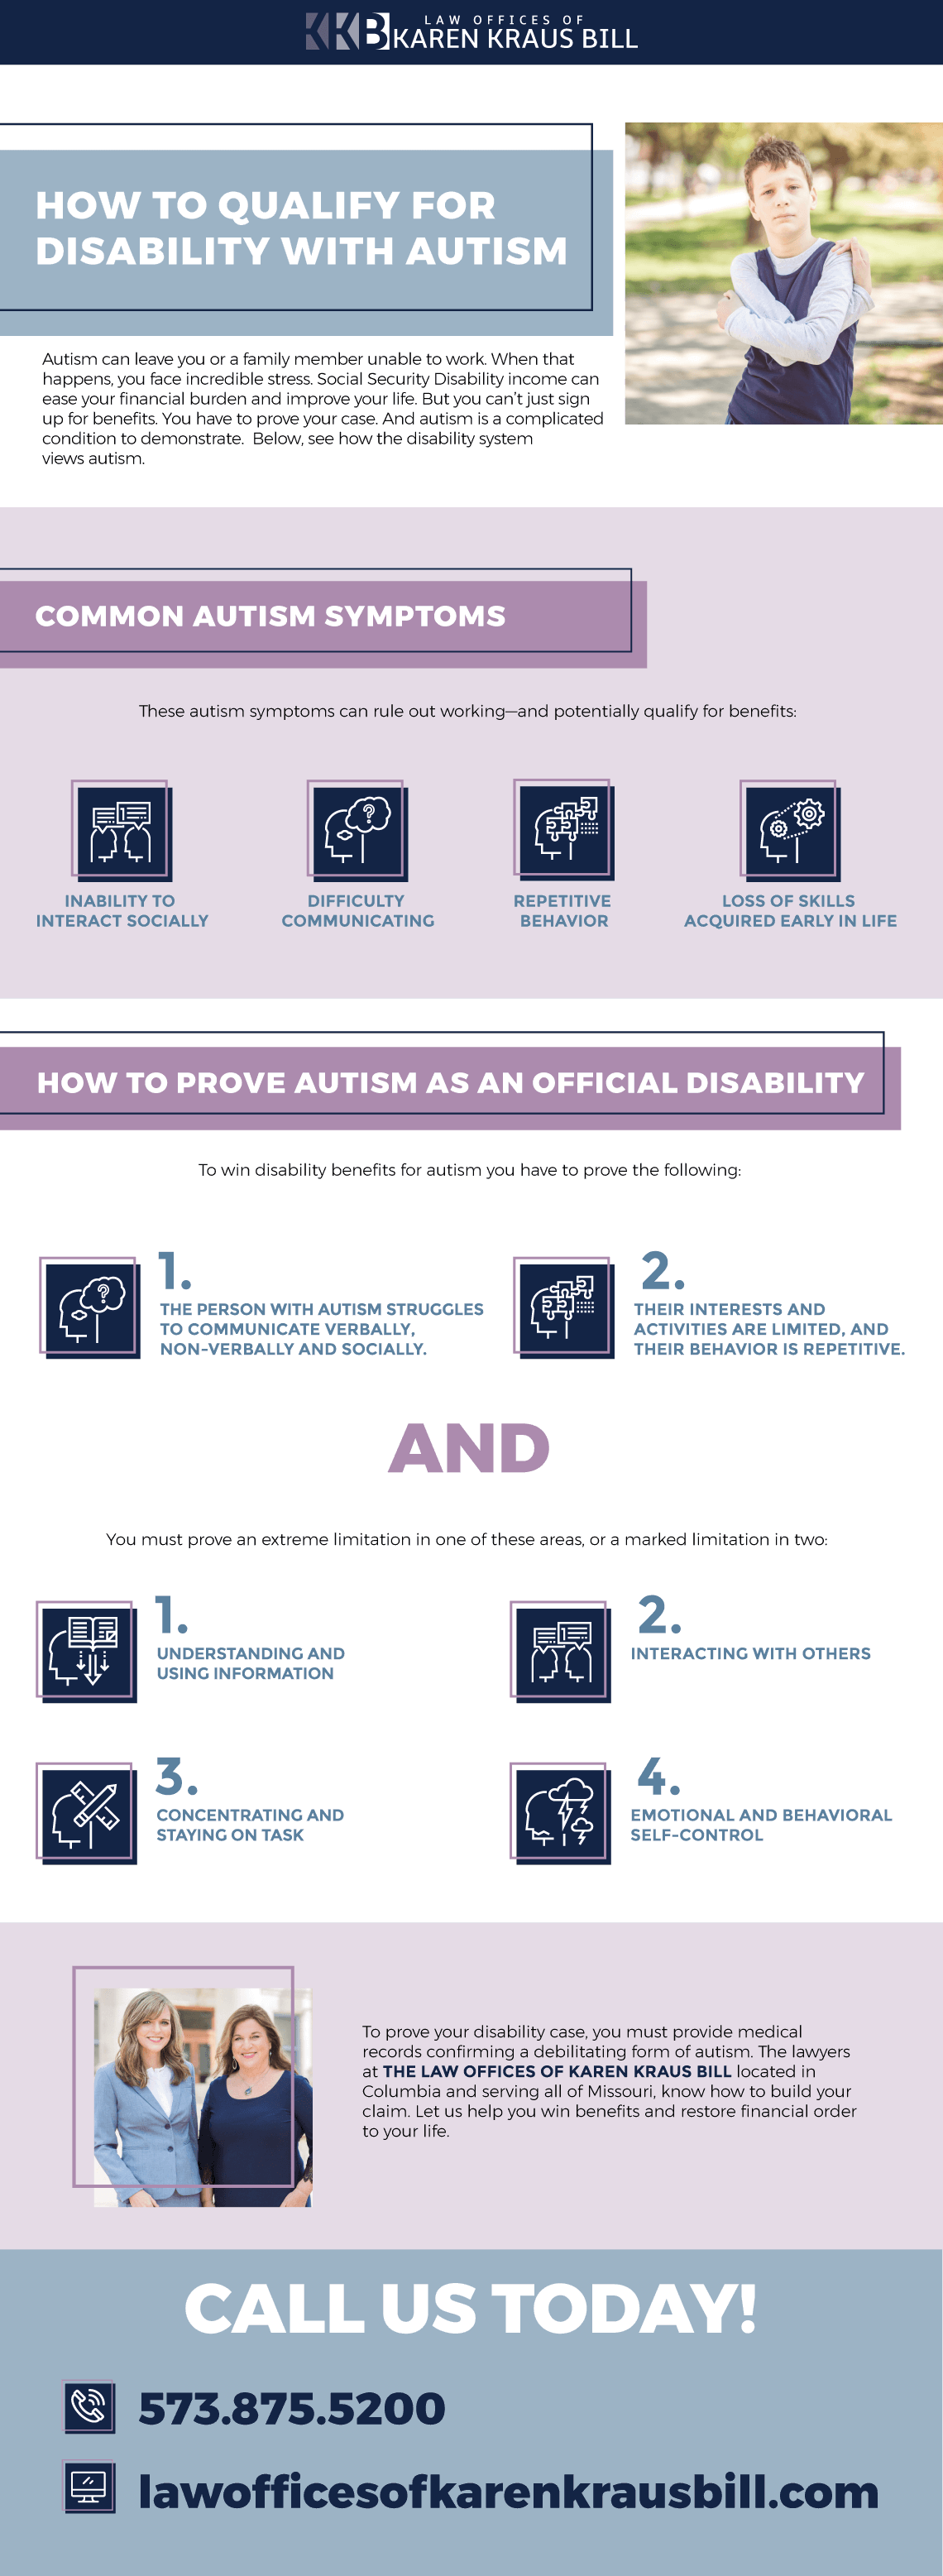 This is the How to Qualify for Disability with Autism infographic